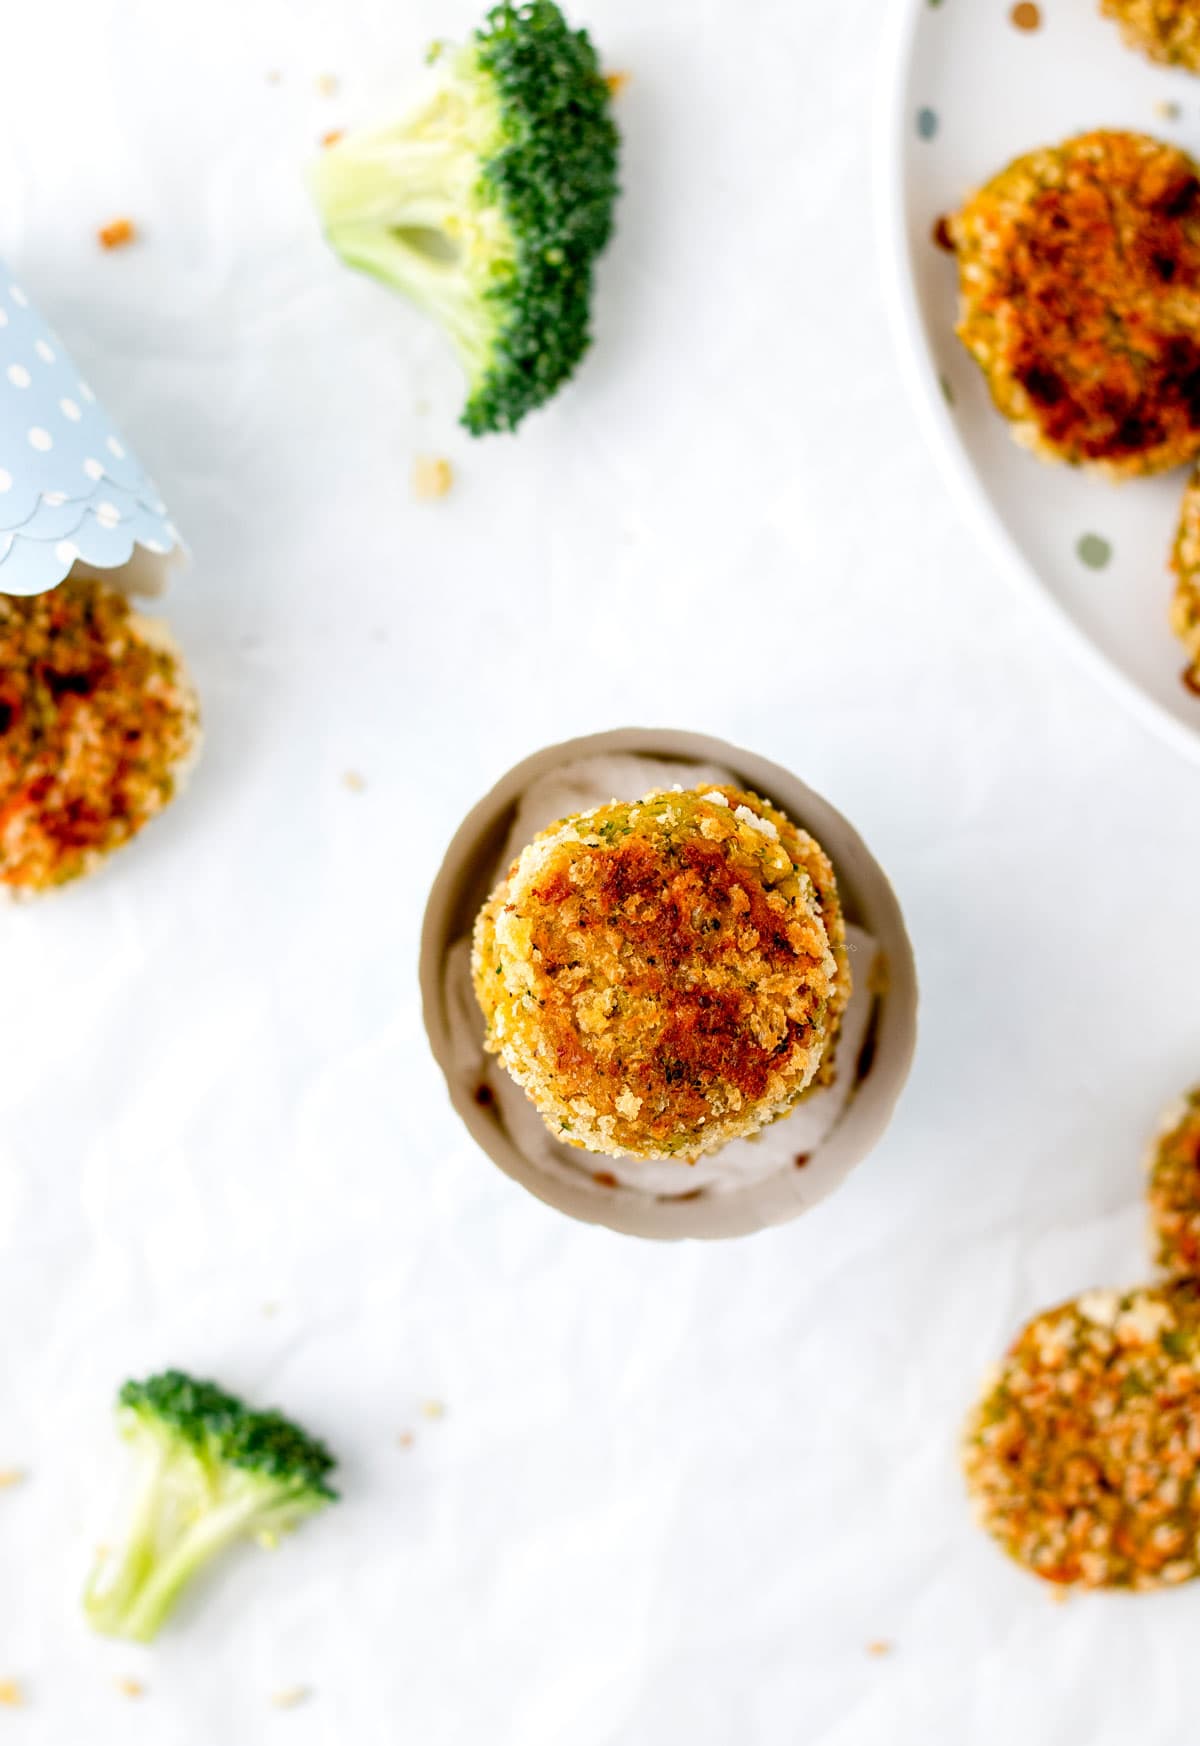 A birds-eye view of crispy chickpea nuggets stacked in a polka dotted cup.